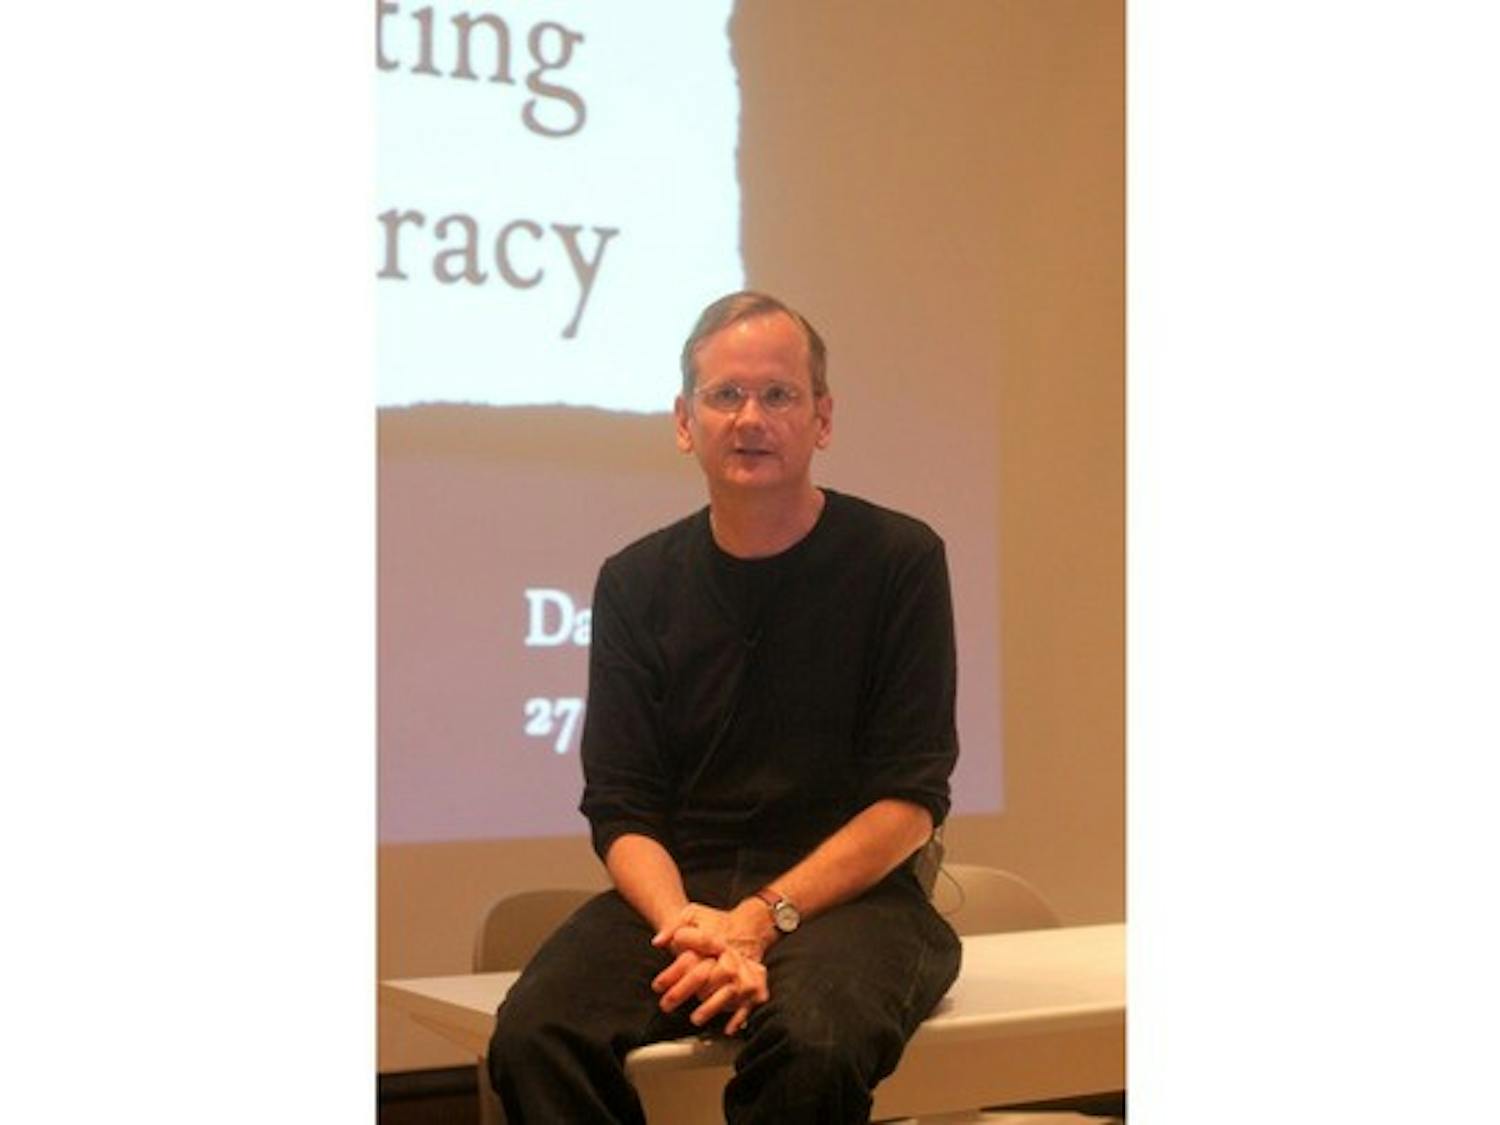 Harvard Law School professor Lawrence Lessig described the influence of lobbyists and campaign donors on public policy.